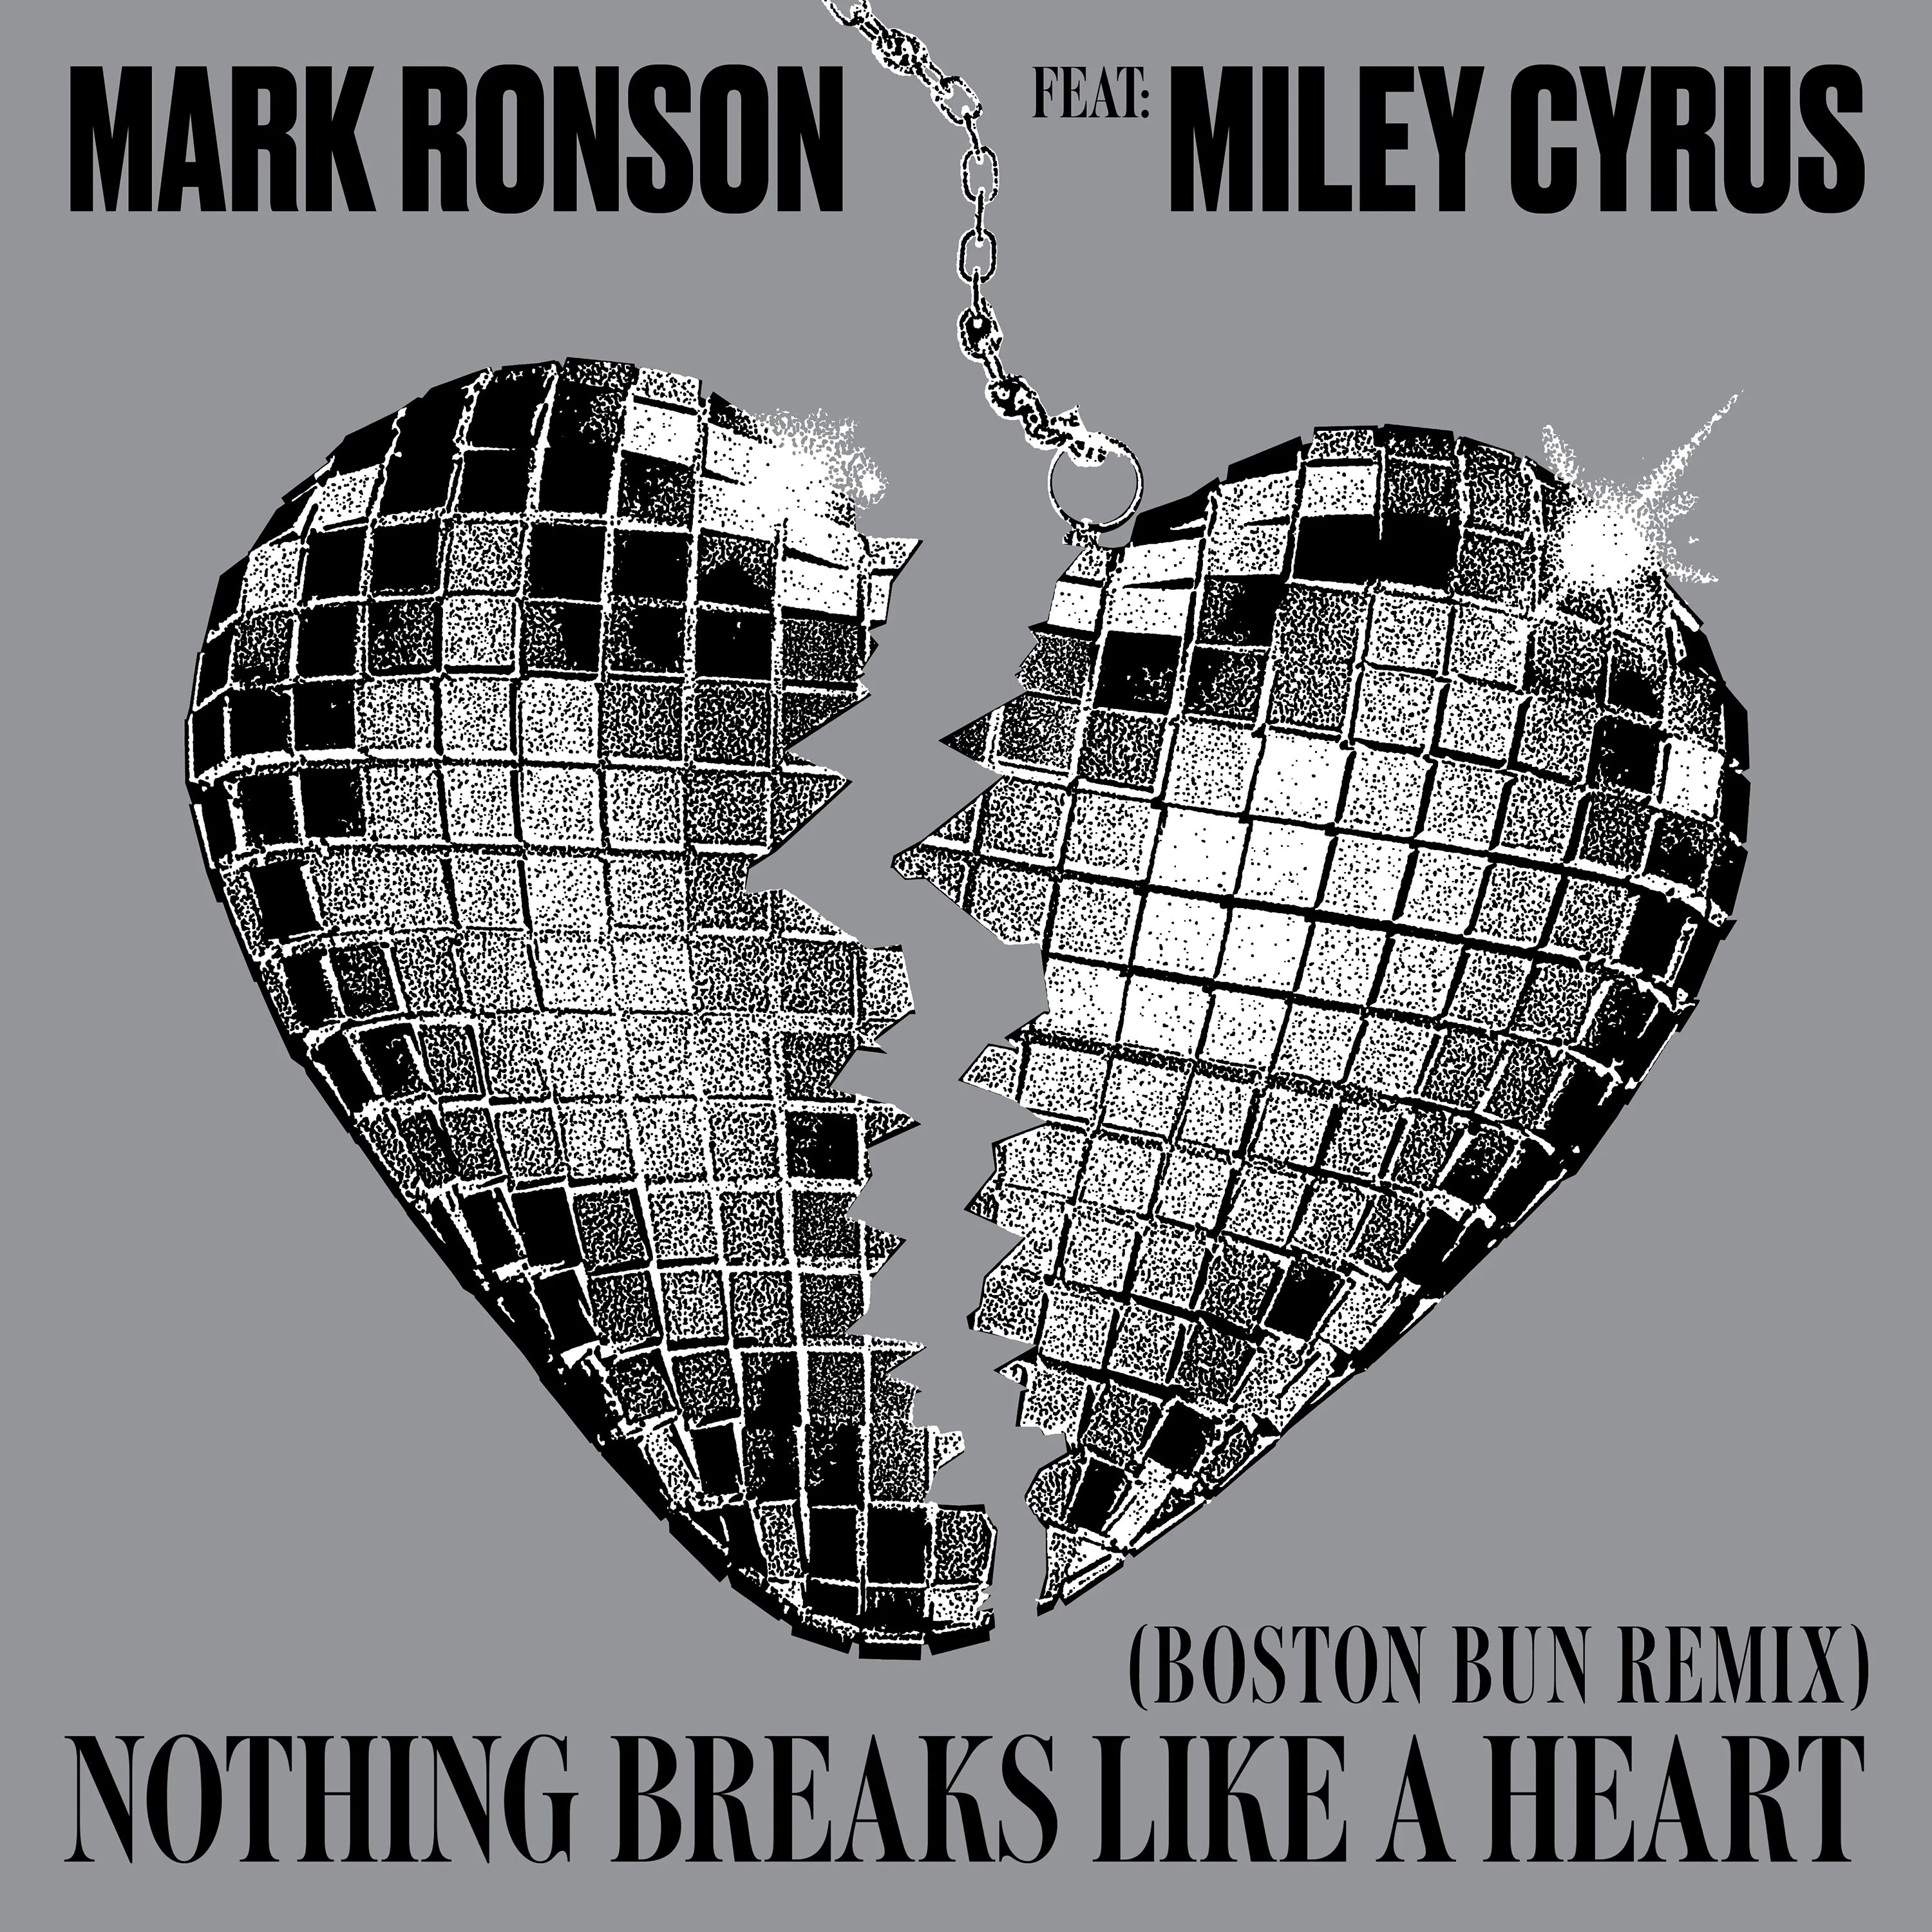 Mark Ronson Miley Cyrus nothing Breaks like a Heart. Mark Ronson Miley Cyrus. Майли Сайрус nothing Breaks. Mark Ronson nothing Breaks like a Heart обложка. Hearts like песня